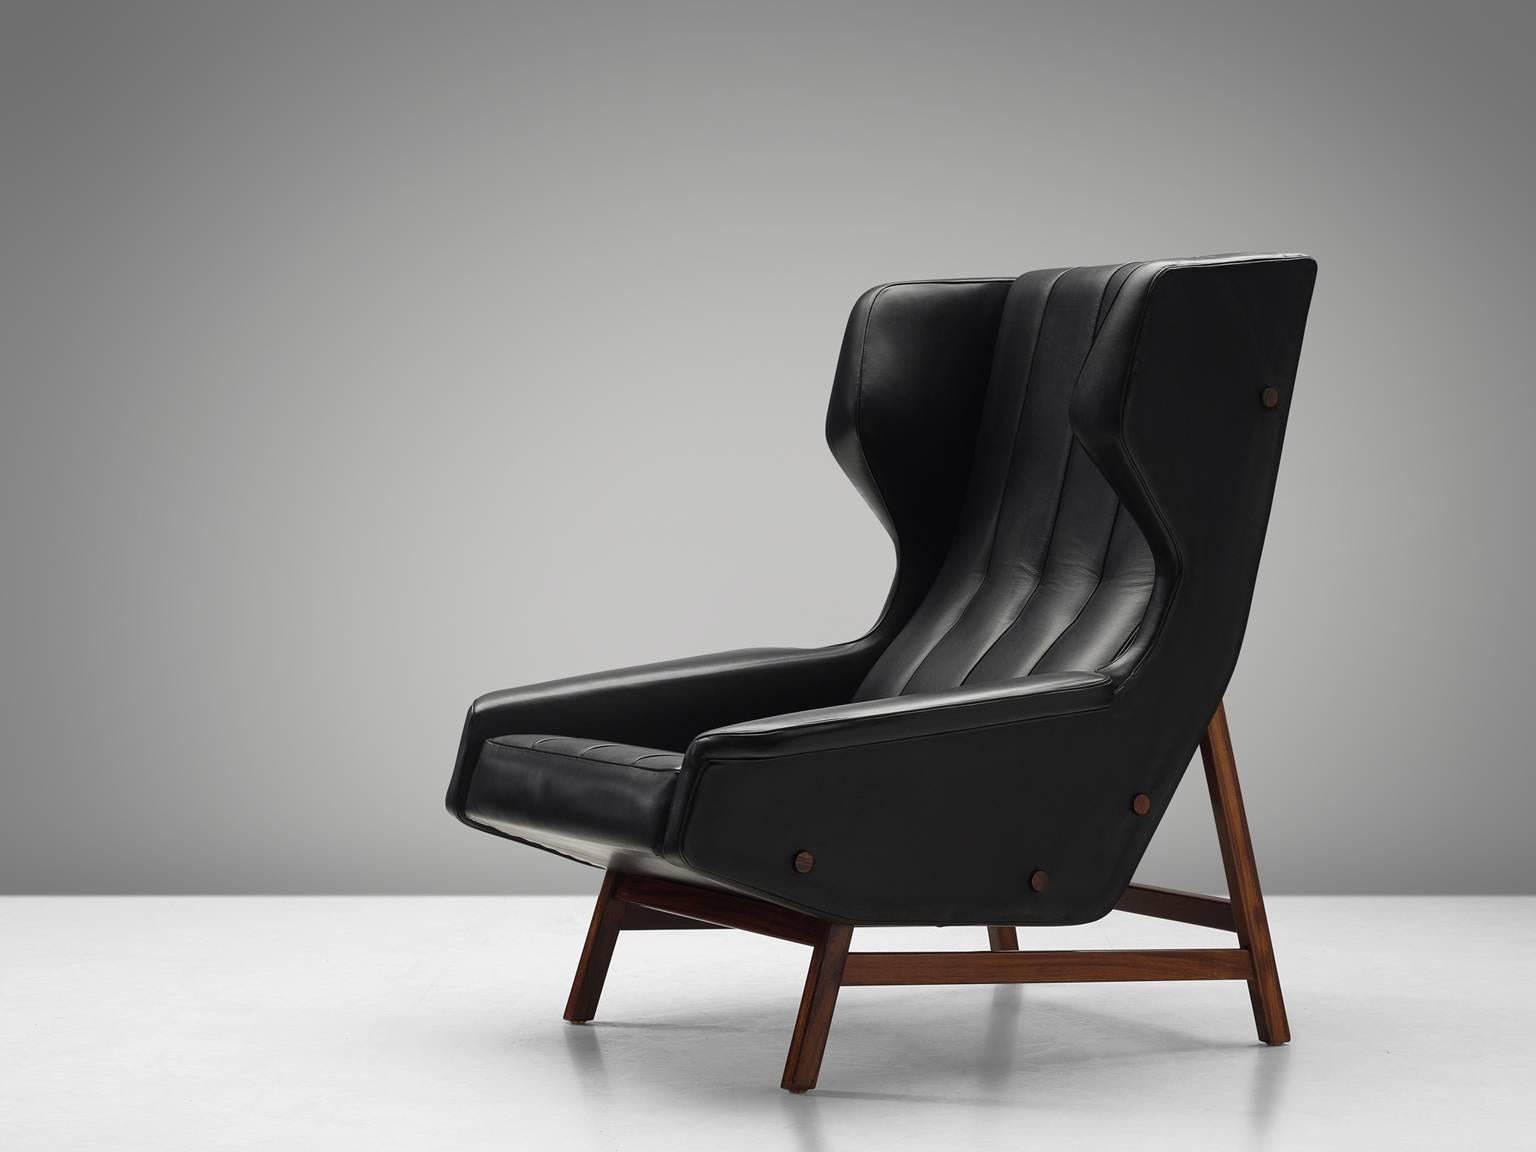 Gianfranco Frattini, lounge chair model 877, black aniline leather and rosewood, made by Cassina, Italy, circa 1959.

Sturdy and voluminous lounge chair in black leather, reupholstered in our in-house workshop. This wingback chair shows nice details